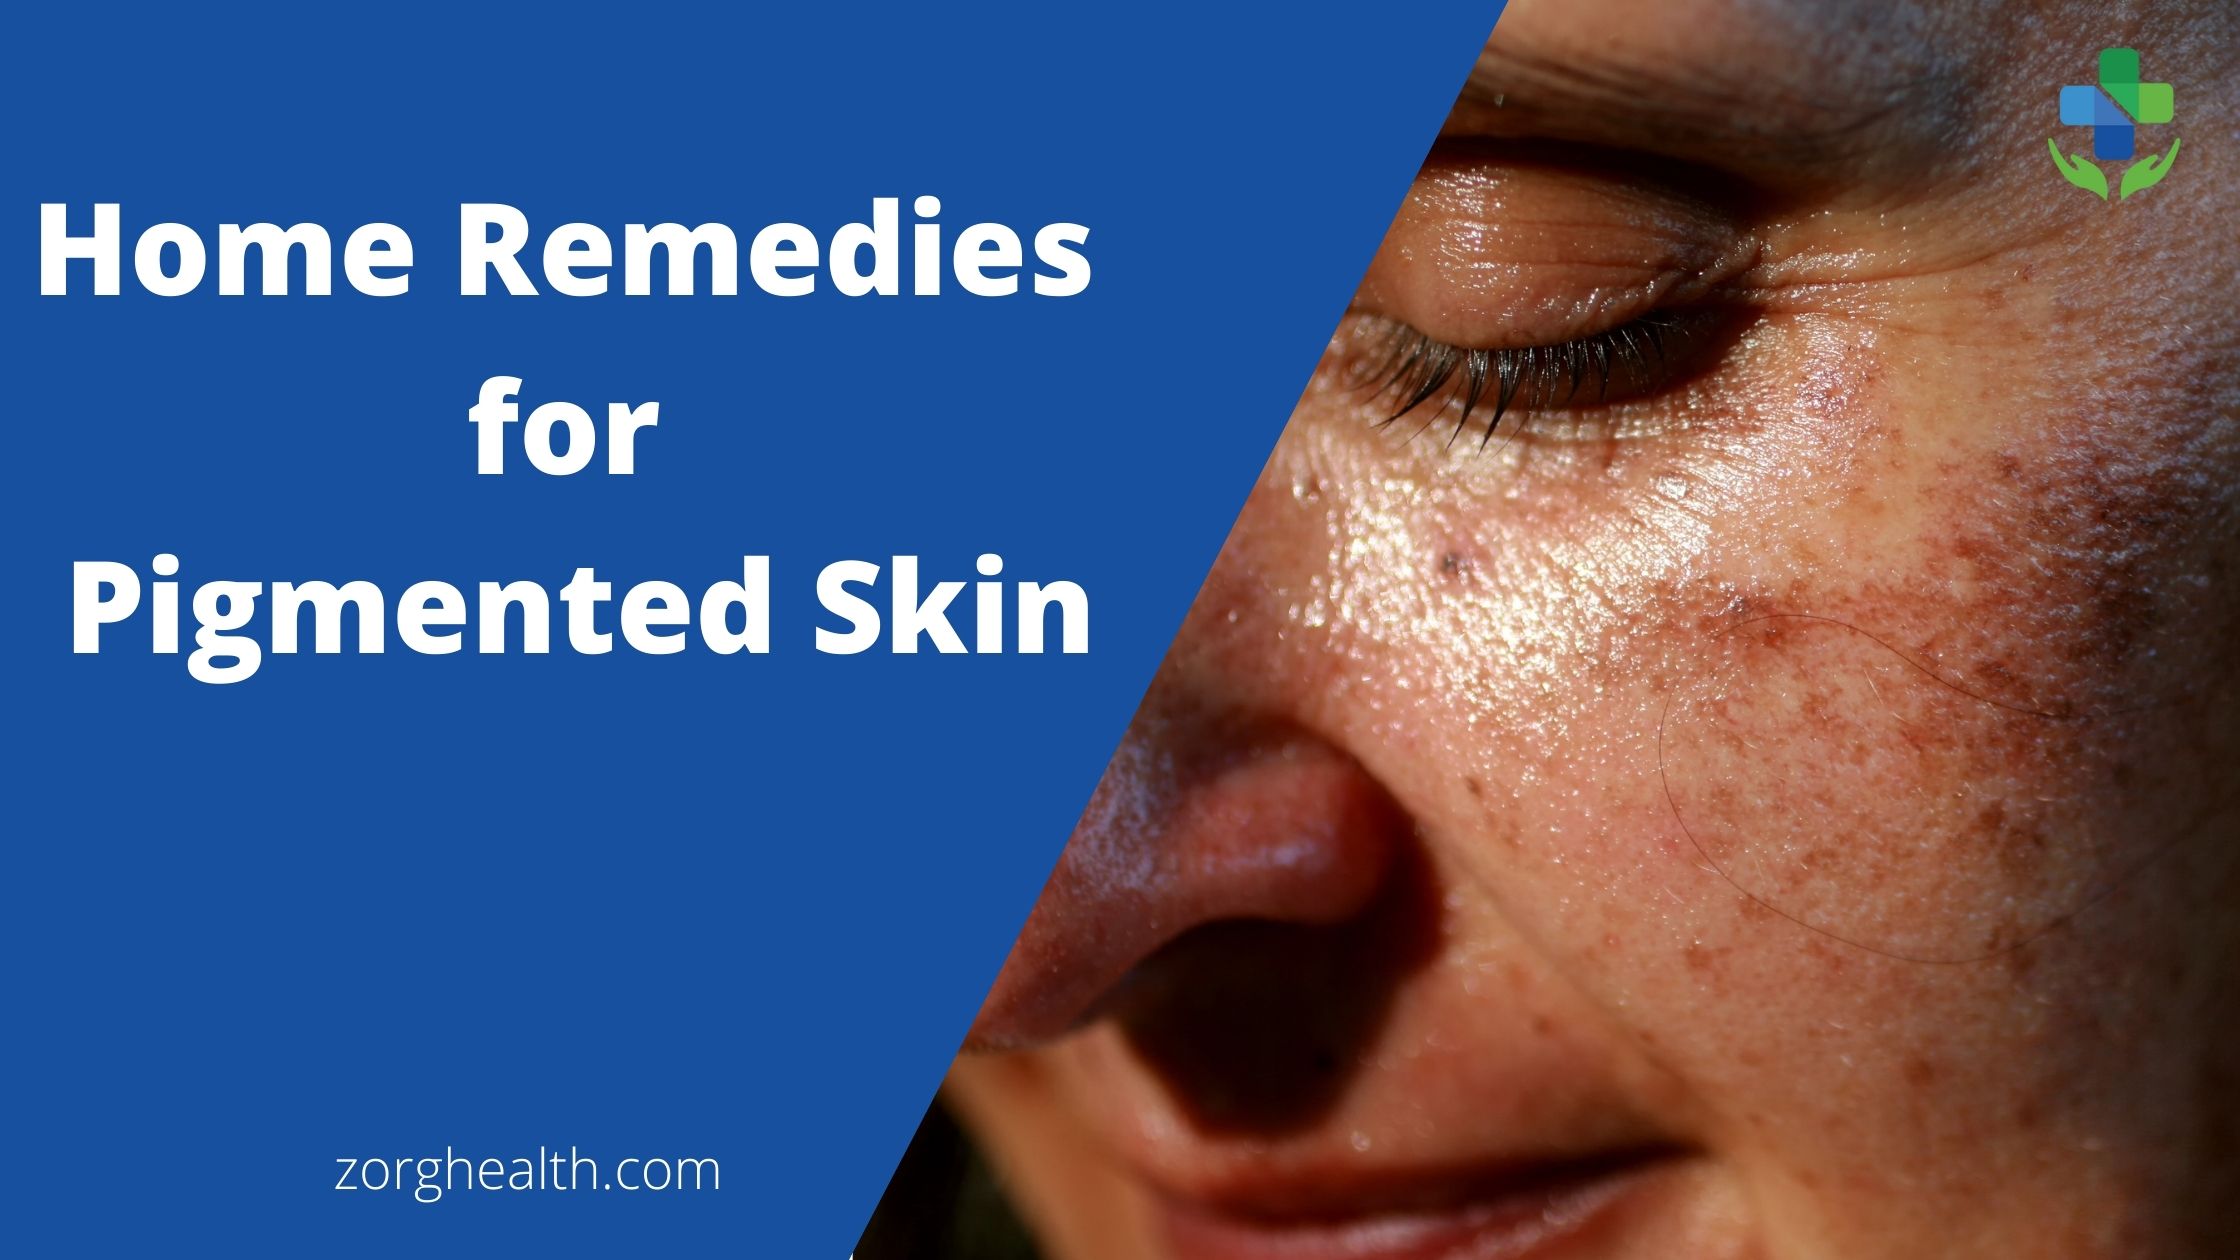 Home remedies for pigmented skin